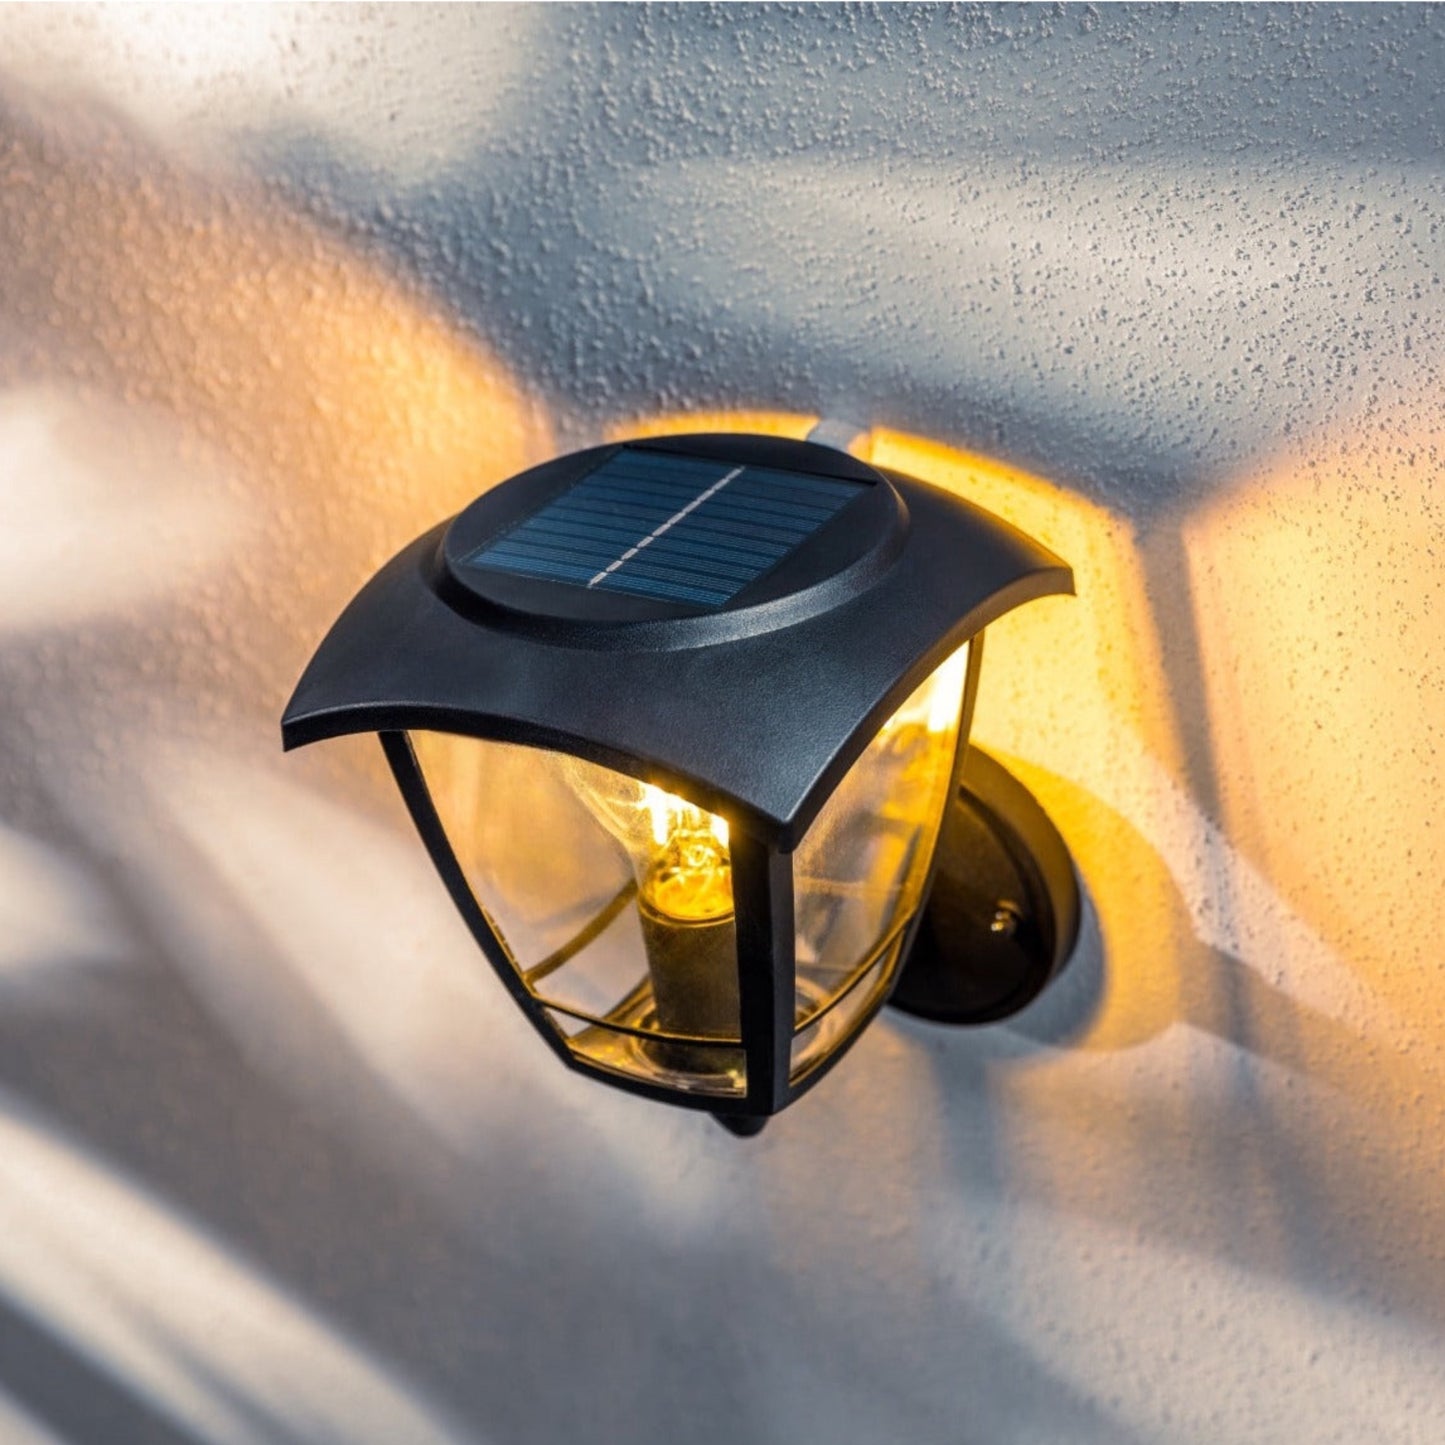 Create an aesthetically pleasing lighting system around your home with our Lara solar lantern light for your walls. This product is featured as an elegant and traditional lantern wall light design, constructed from black polycarbonate and fitted with clear polycarbonate diffusers.